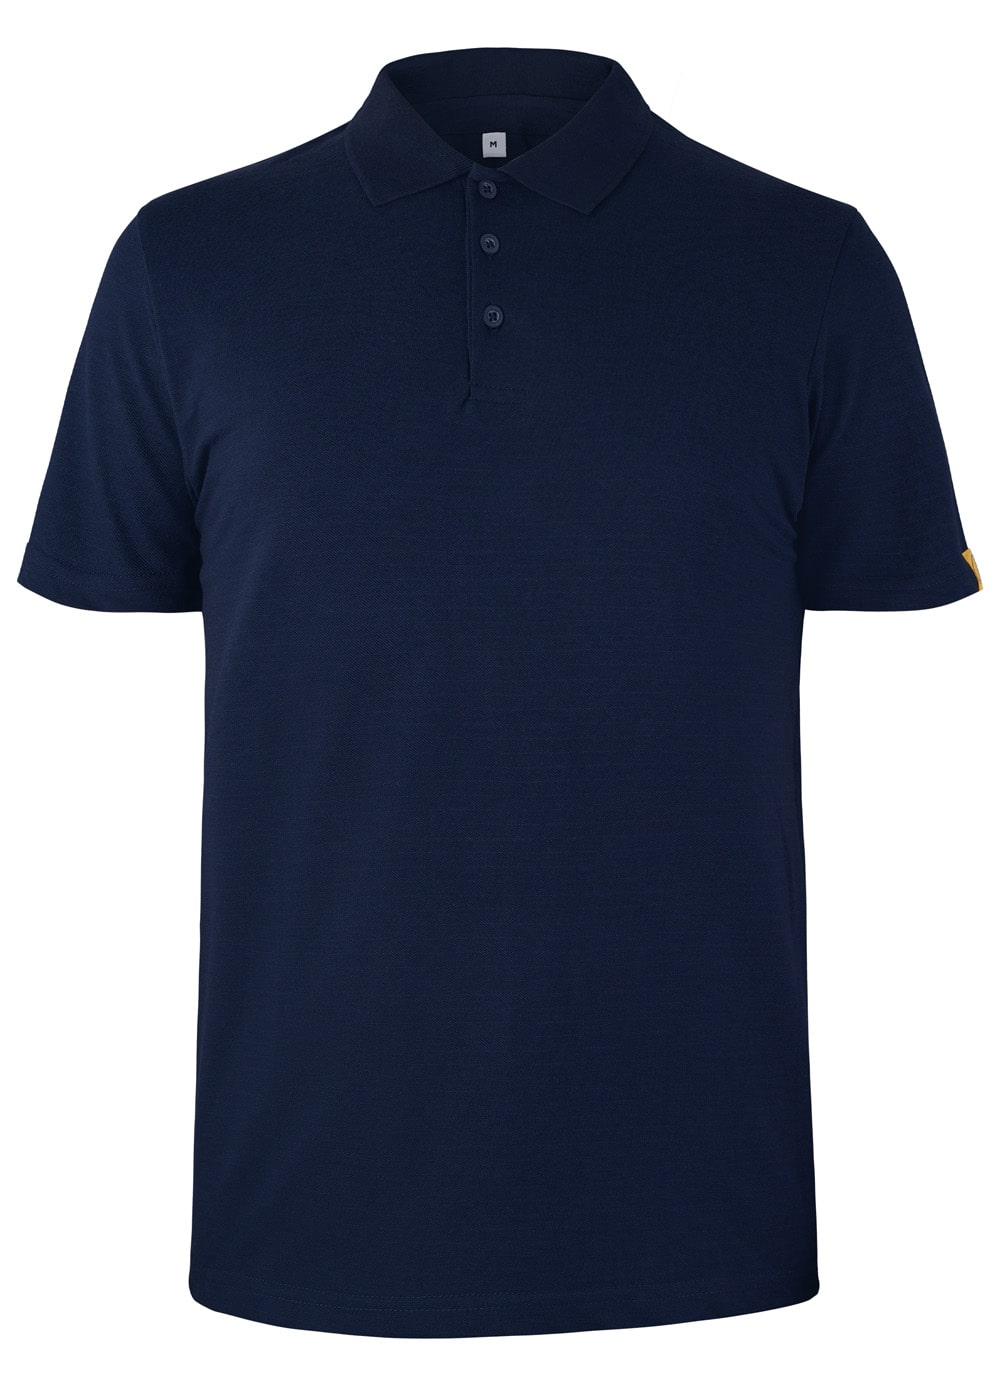 Photo of a navy blue T-shirt, product photography for webshop